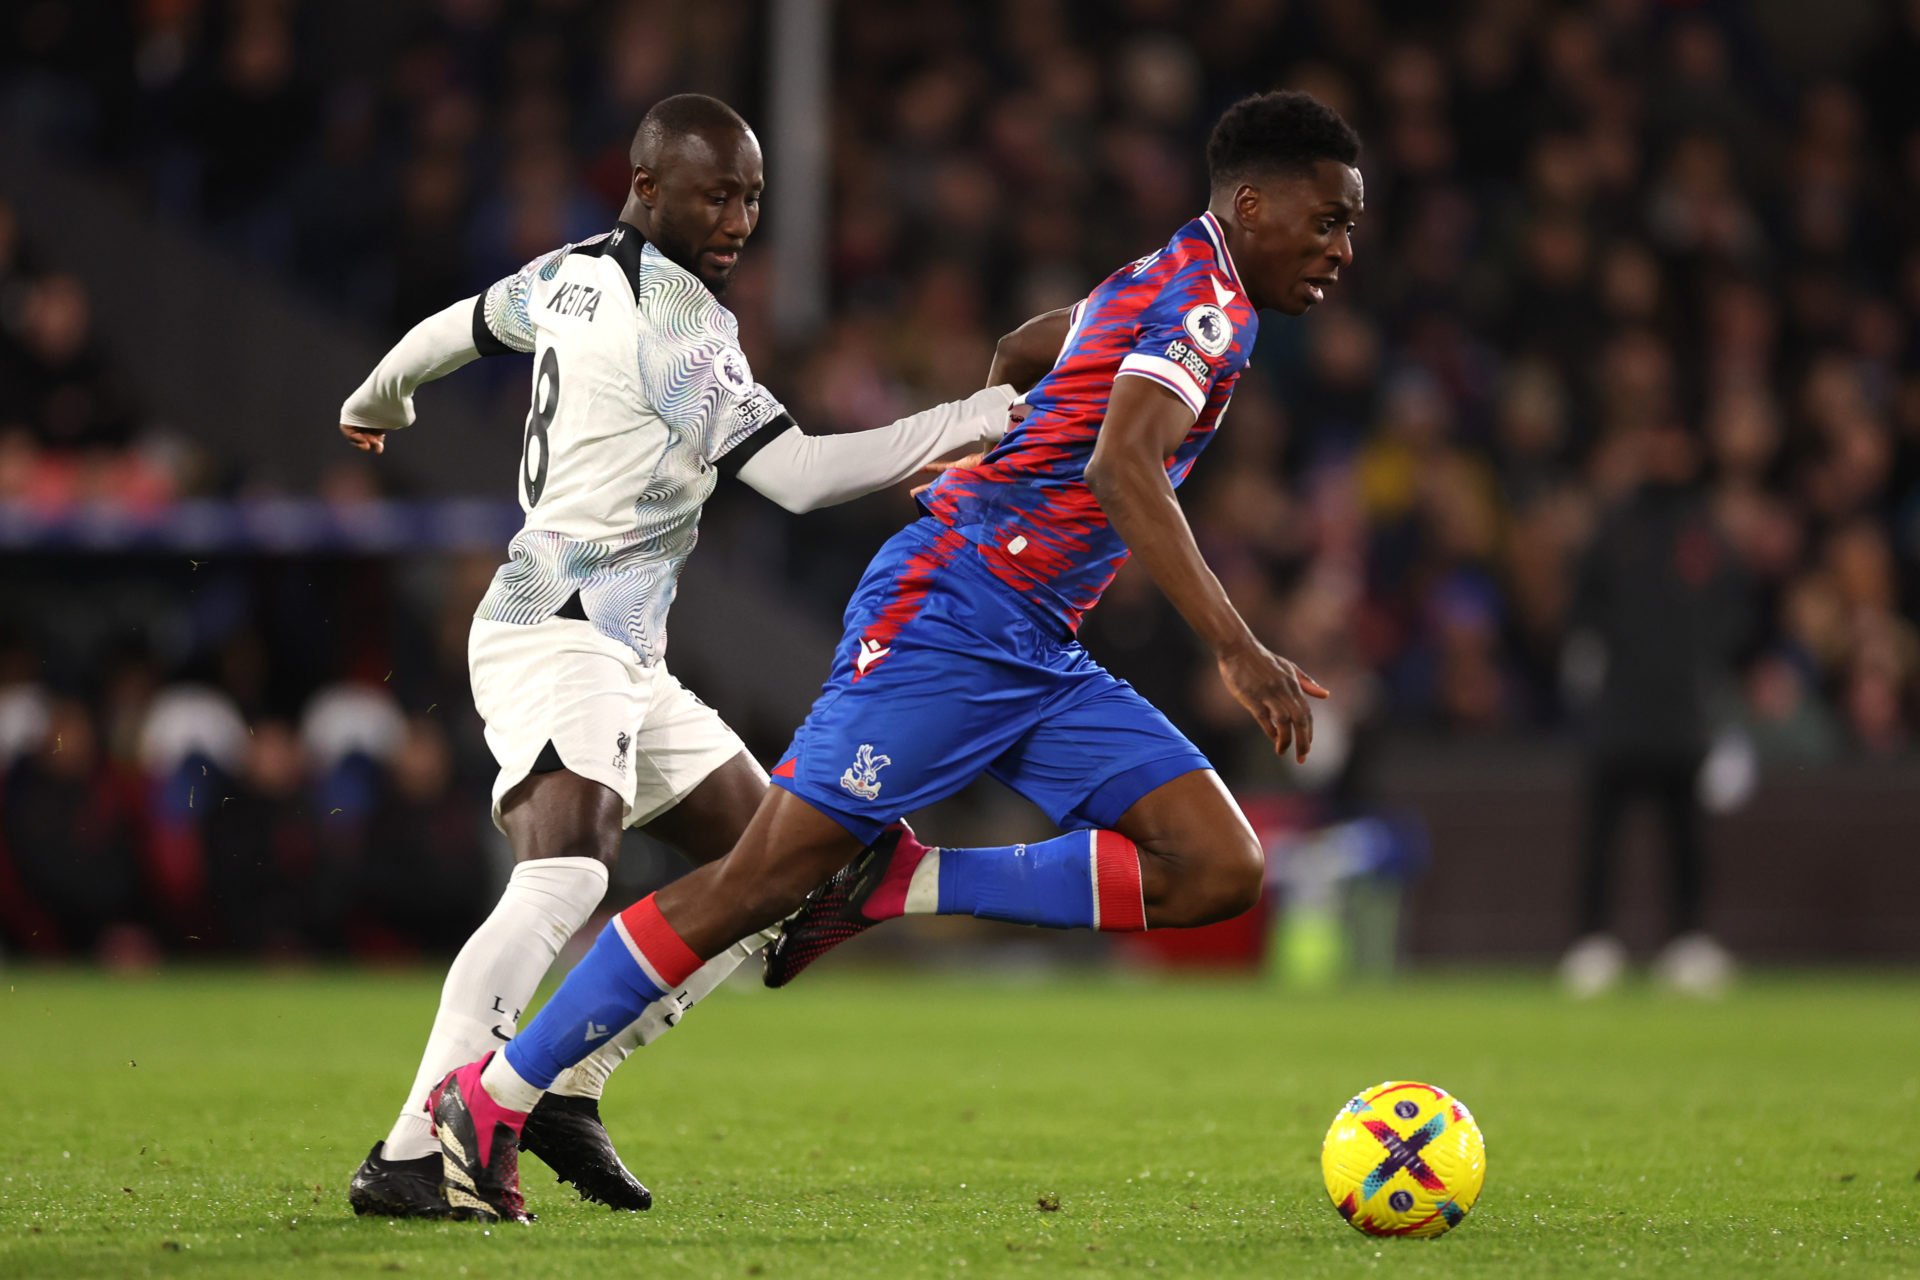 Jurgen Klopp now explains Naby Keita substitution after Crystal Palace draw